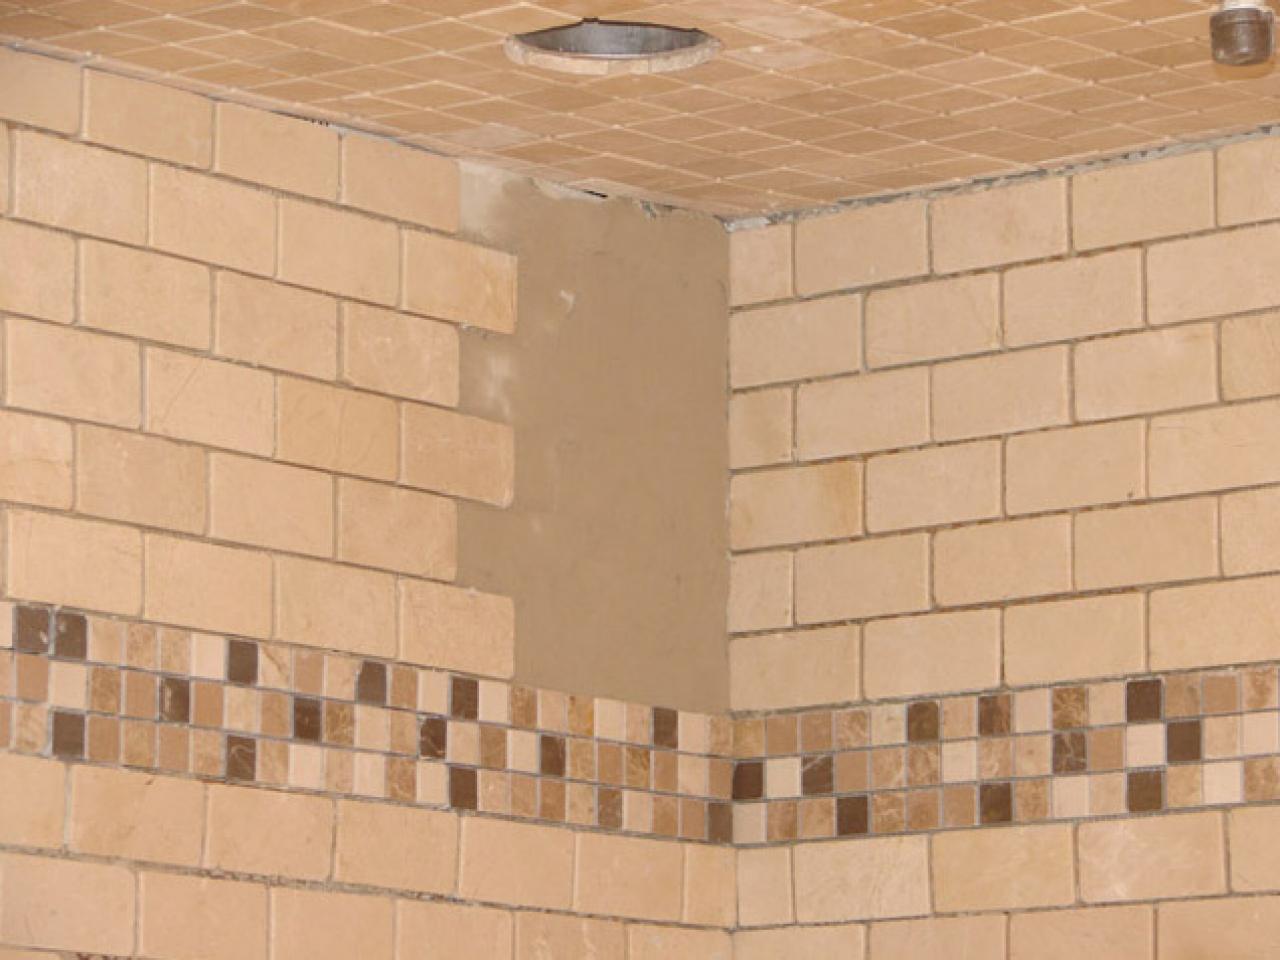 Install Tile In A Bathroom Shower, How To Change Border Tiles In Bathroom